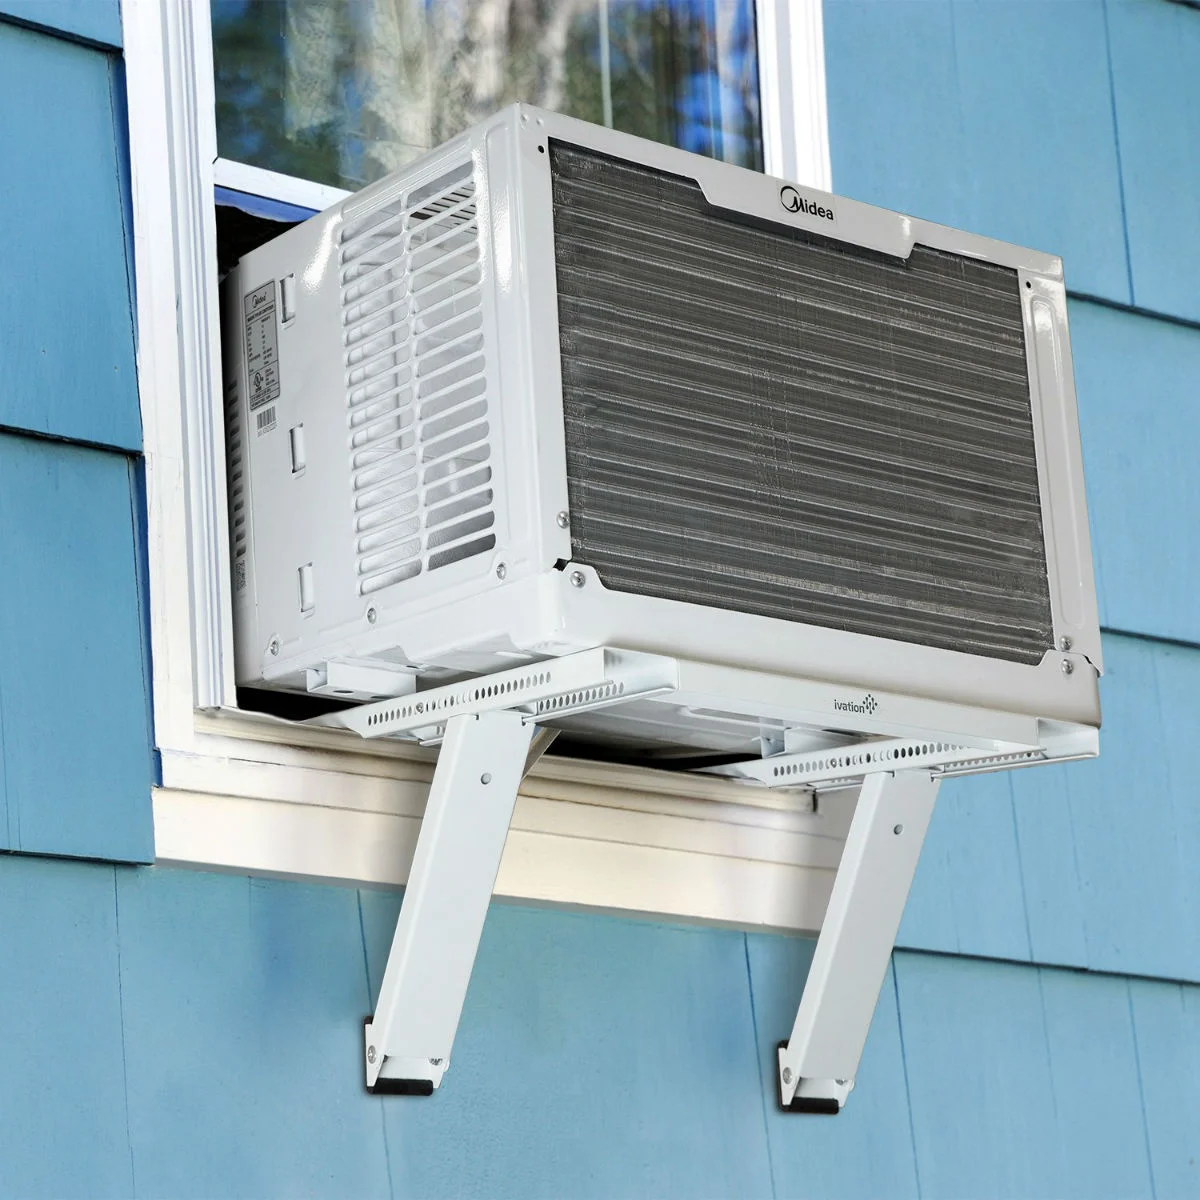 How To Lift Up An Air Conditioning Unit